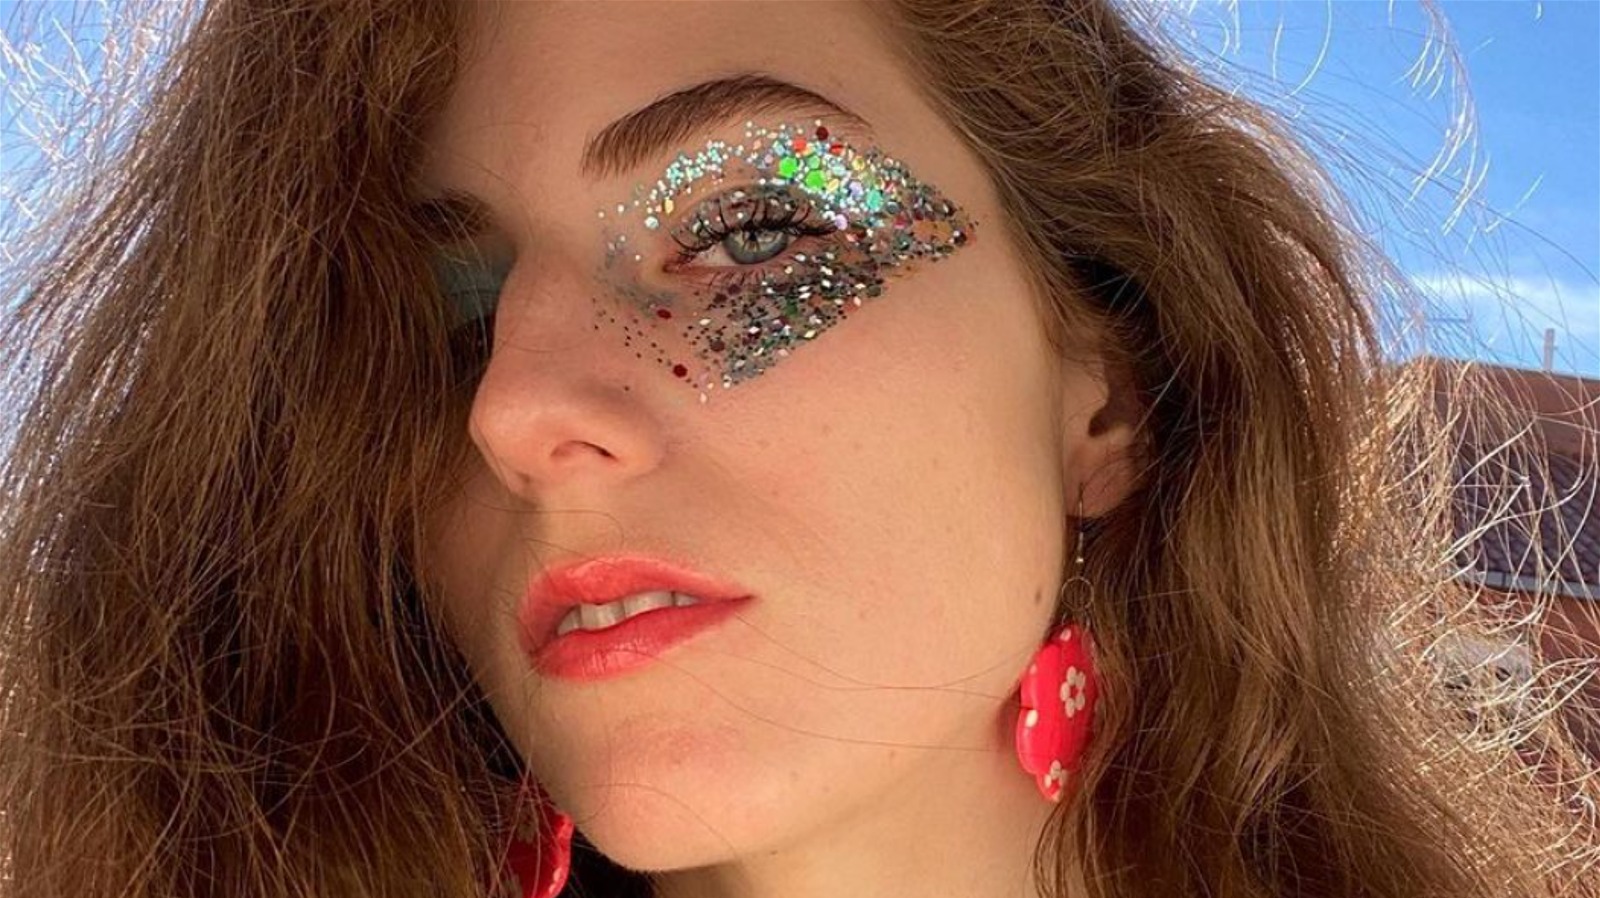 Is Glitter Unsafe For Your Eye Makeup Routine?